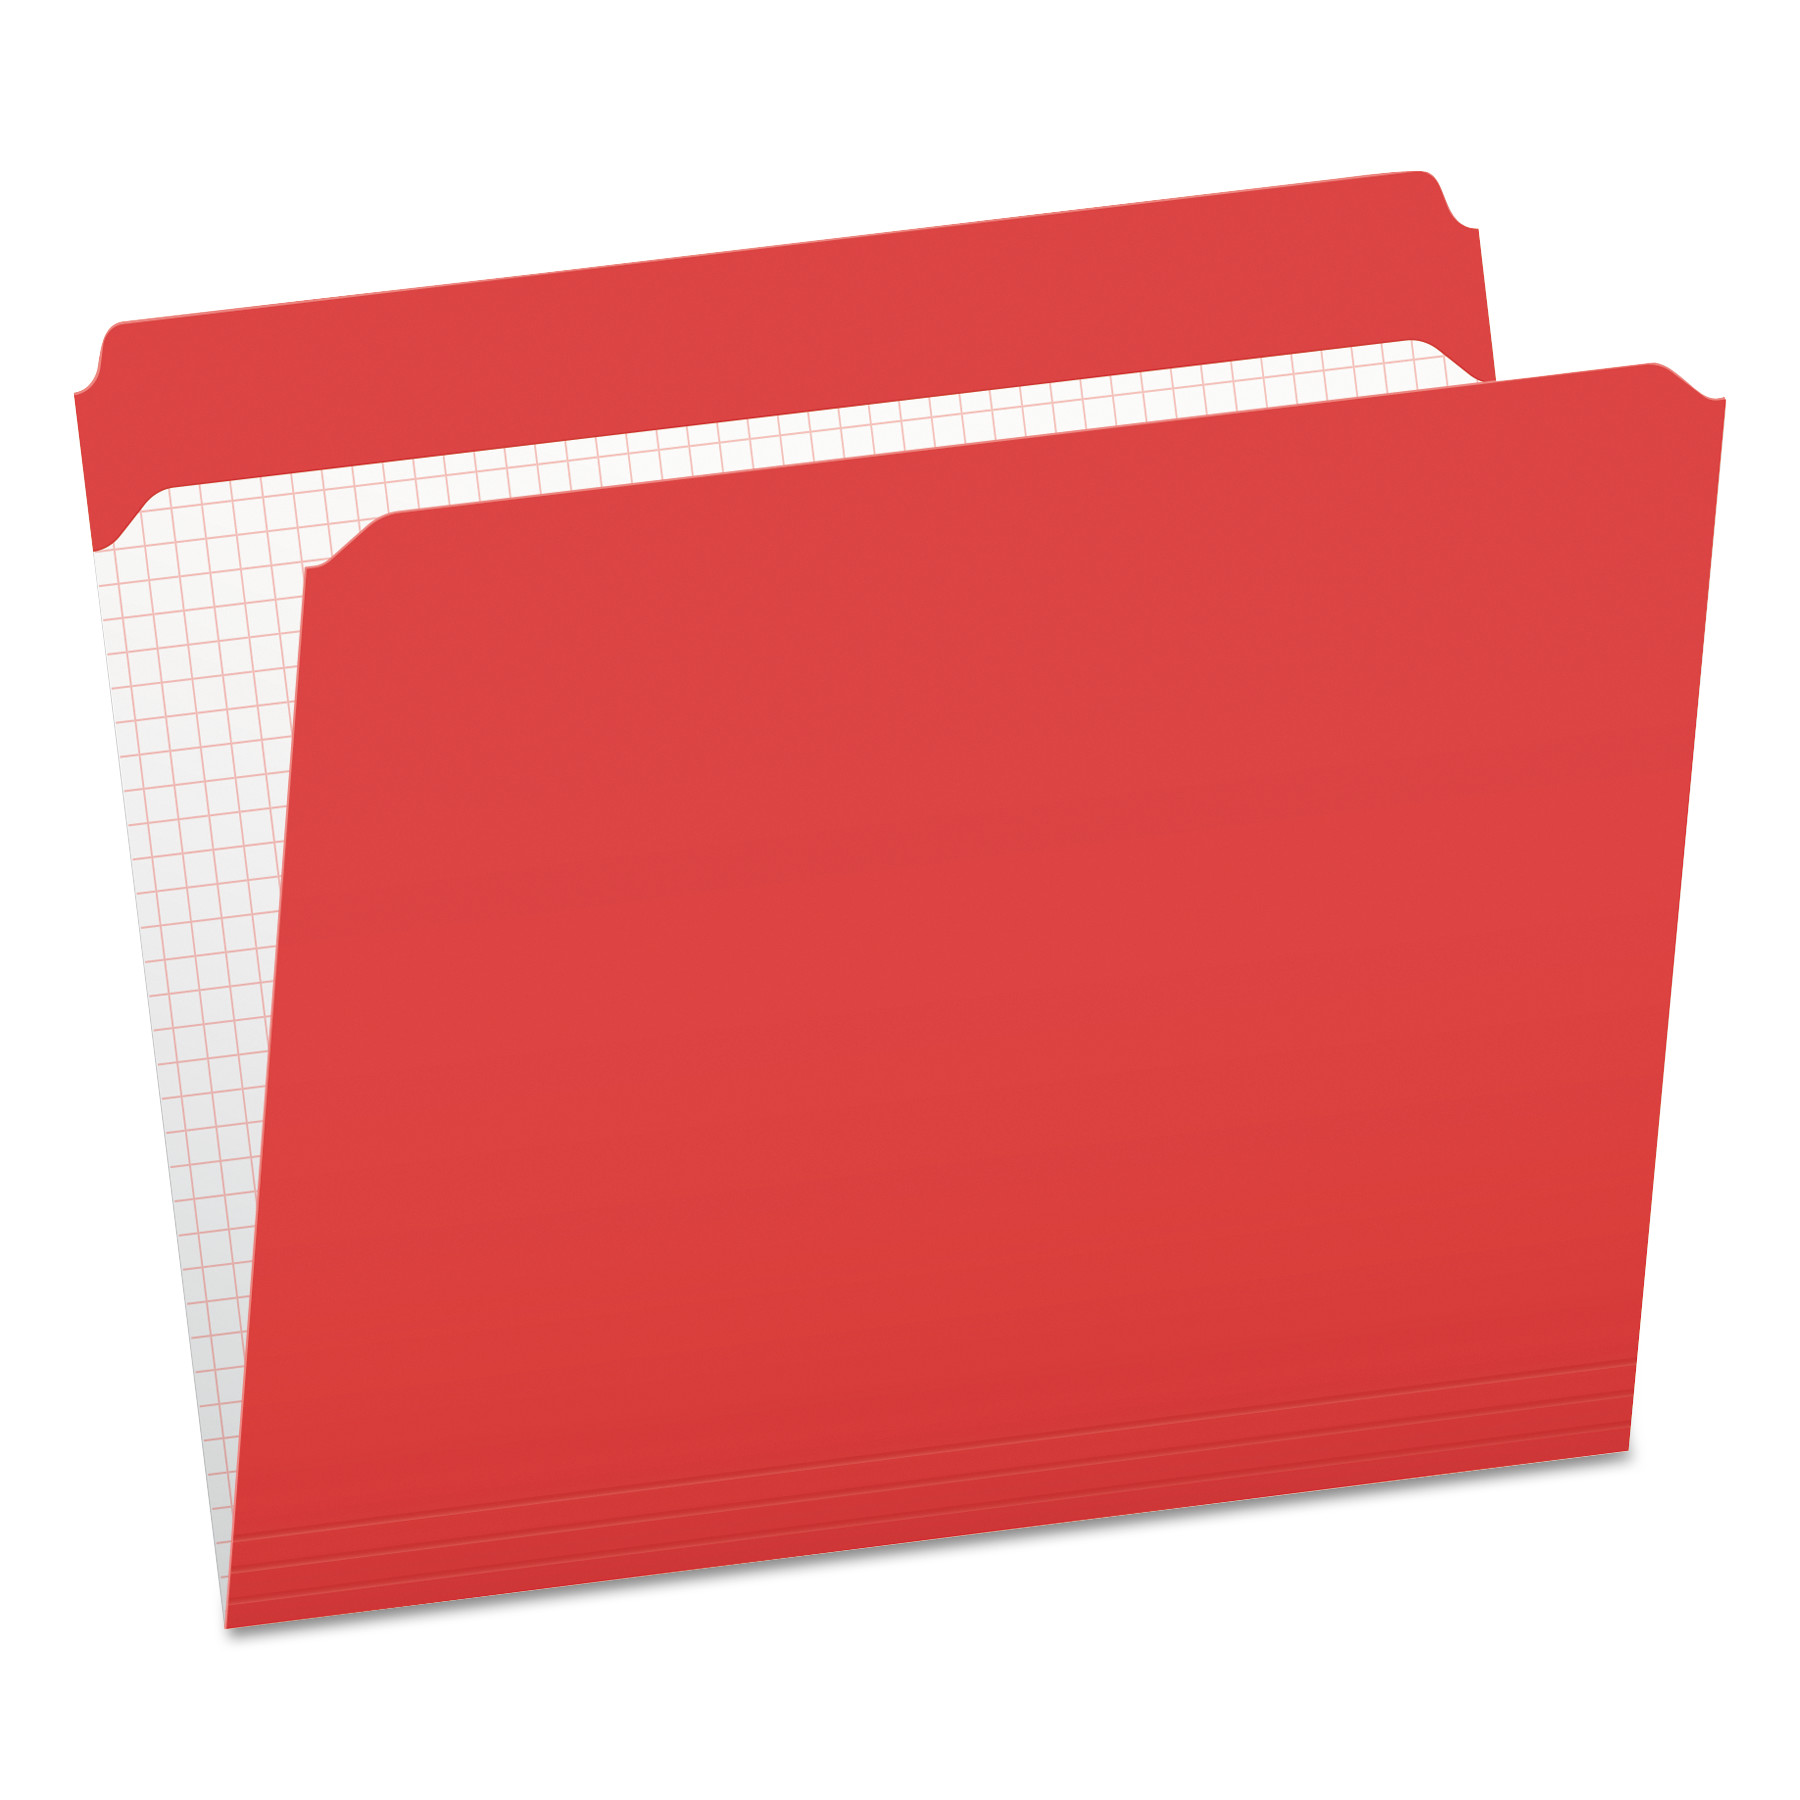  Pendaflex R152 RED Double-Ply Reinforced Top Tab Colored File Folders, Straight Tab, Letter Size, Red, 100/Box (PFXR152RED) 